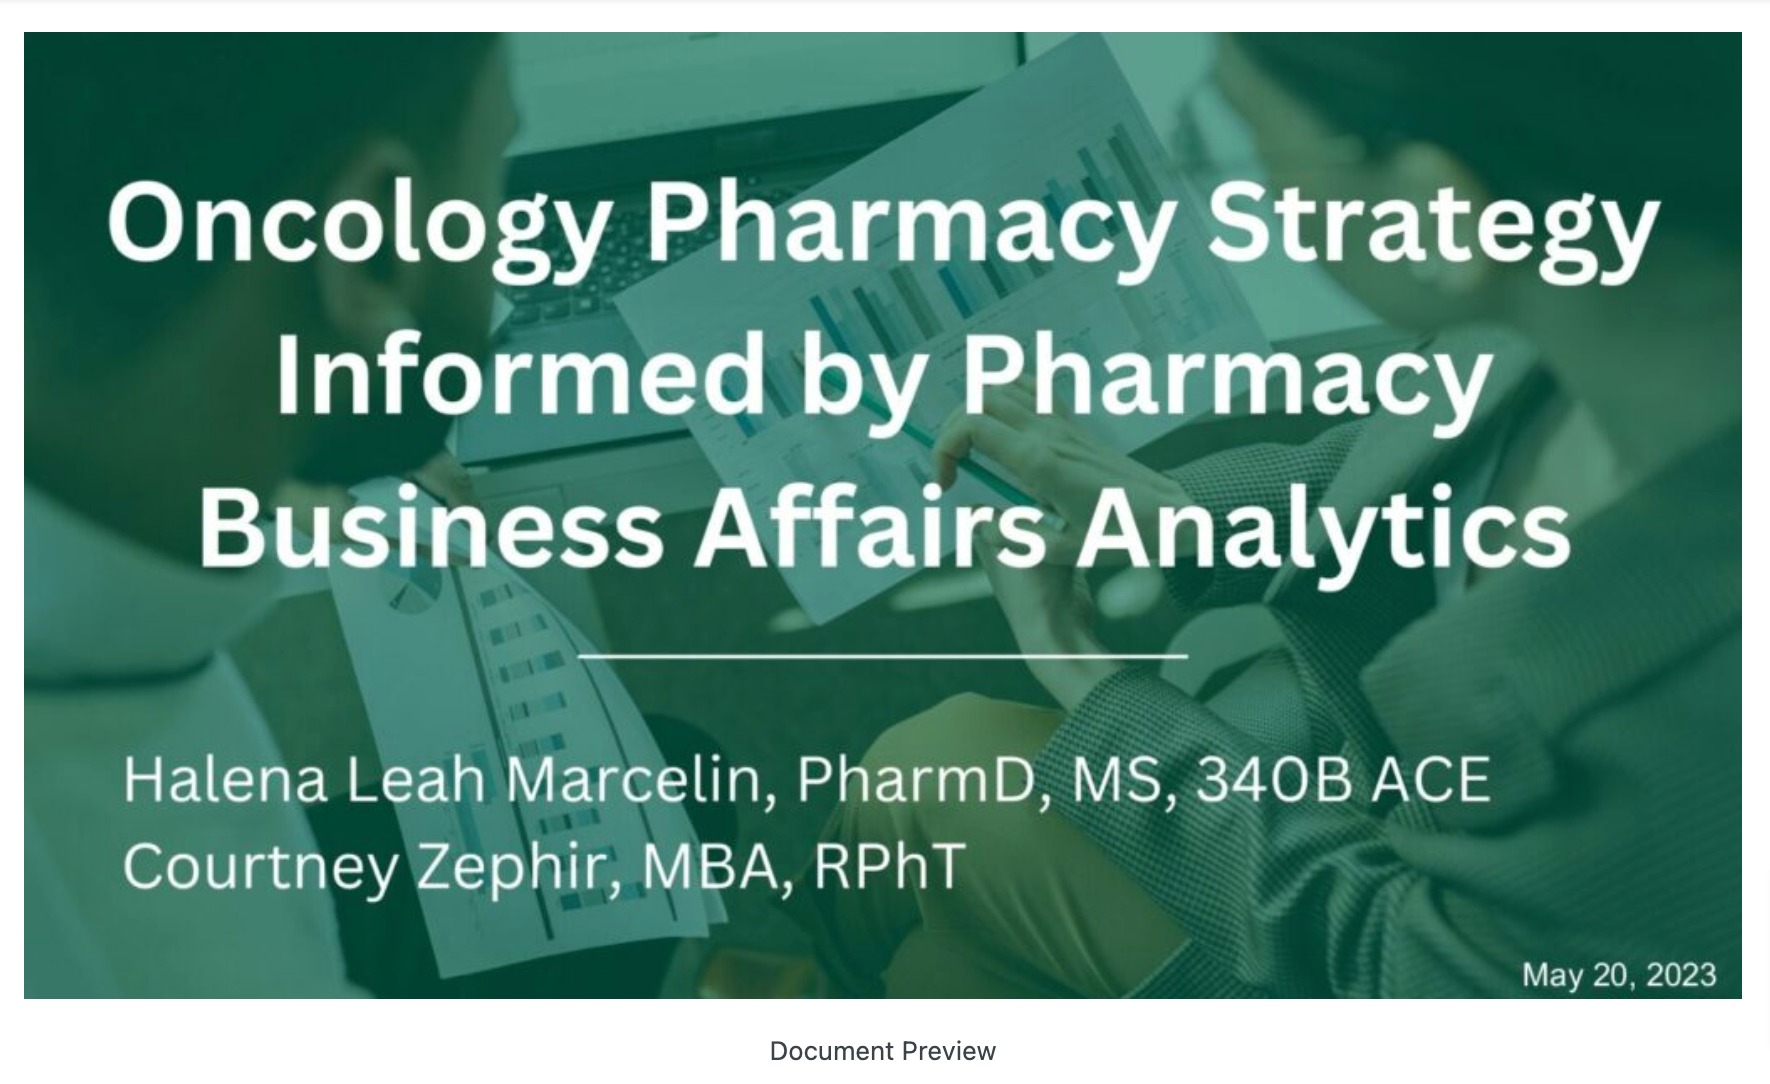 Oncology Pharmacy Strategy Informed by Pharmacy Business Affairs Analytics